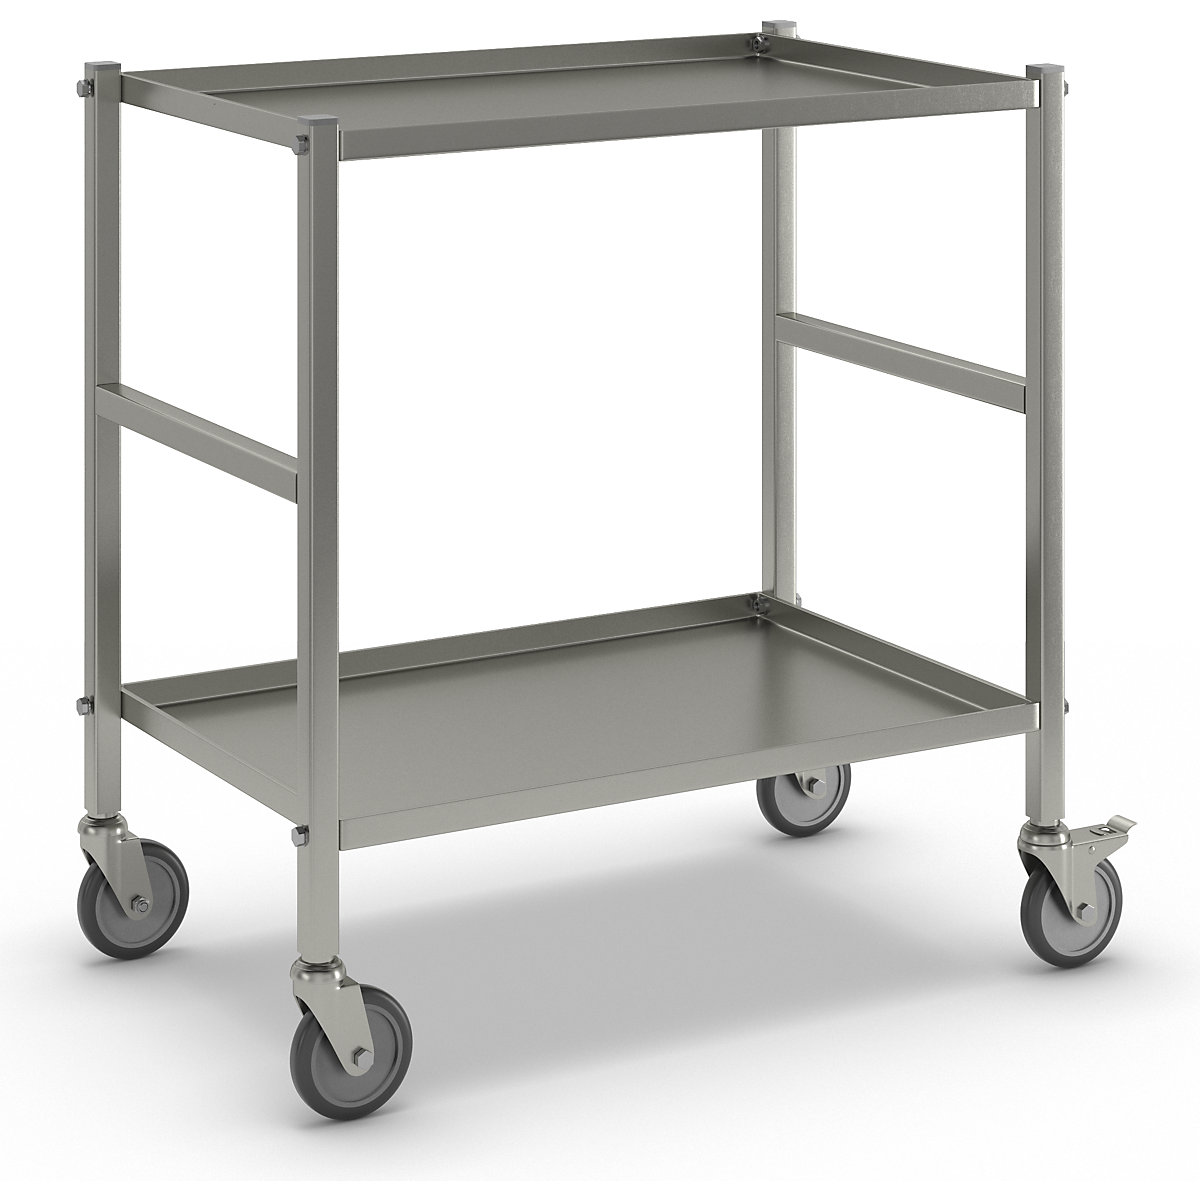 Table trolley with 2 shelves – Kongamek, 4 swivel castors, 2 with stops, electrolytically zinc plated-3